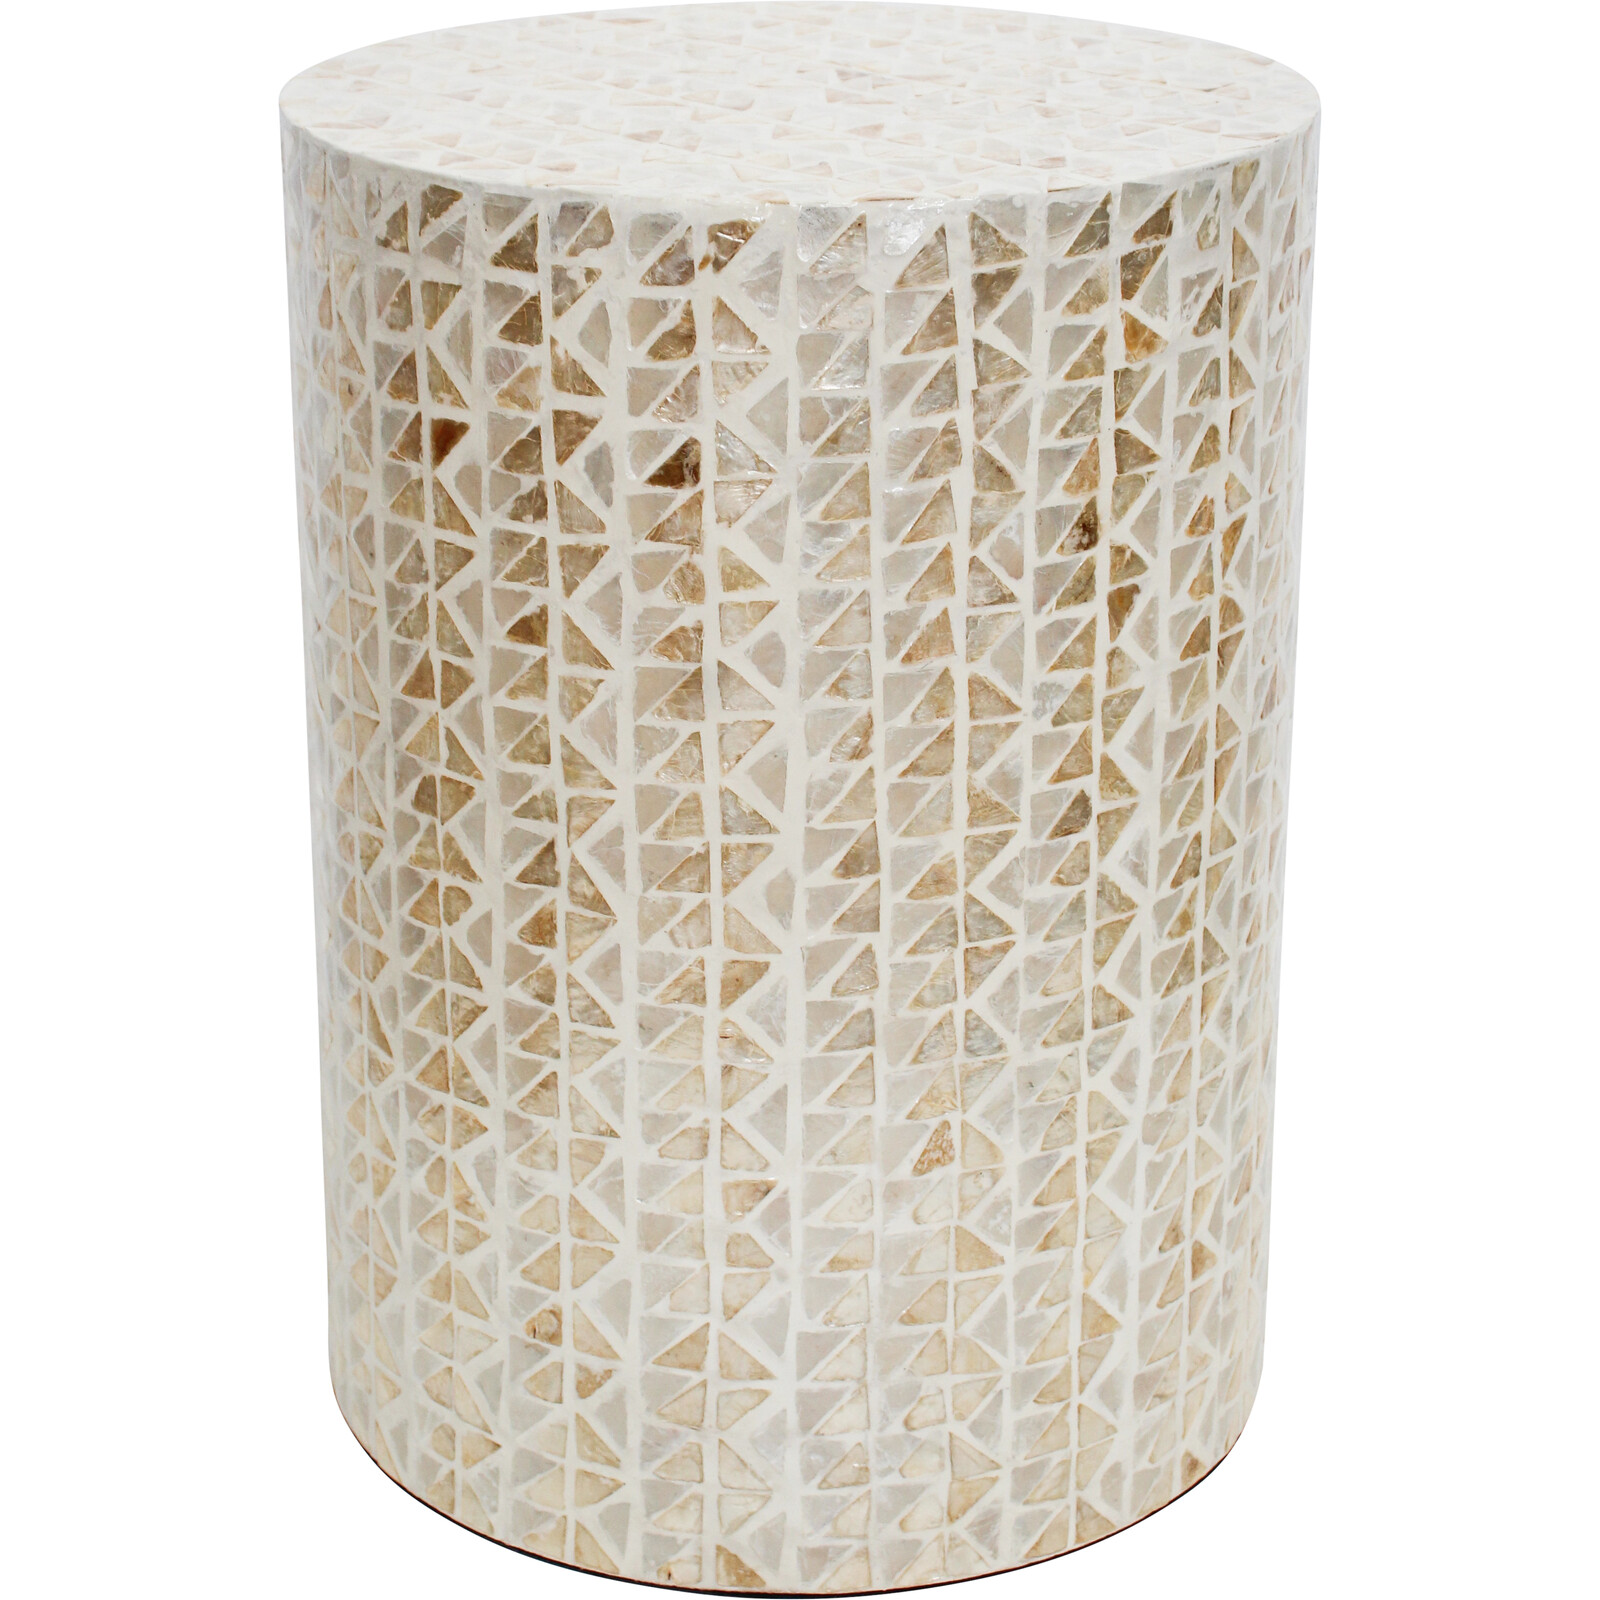 Stool/Table Capiz Cream and Natural